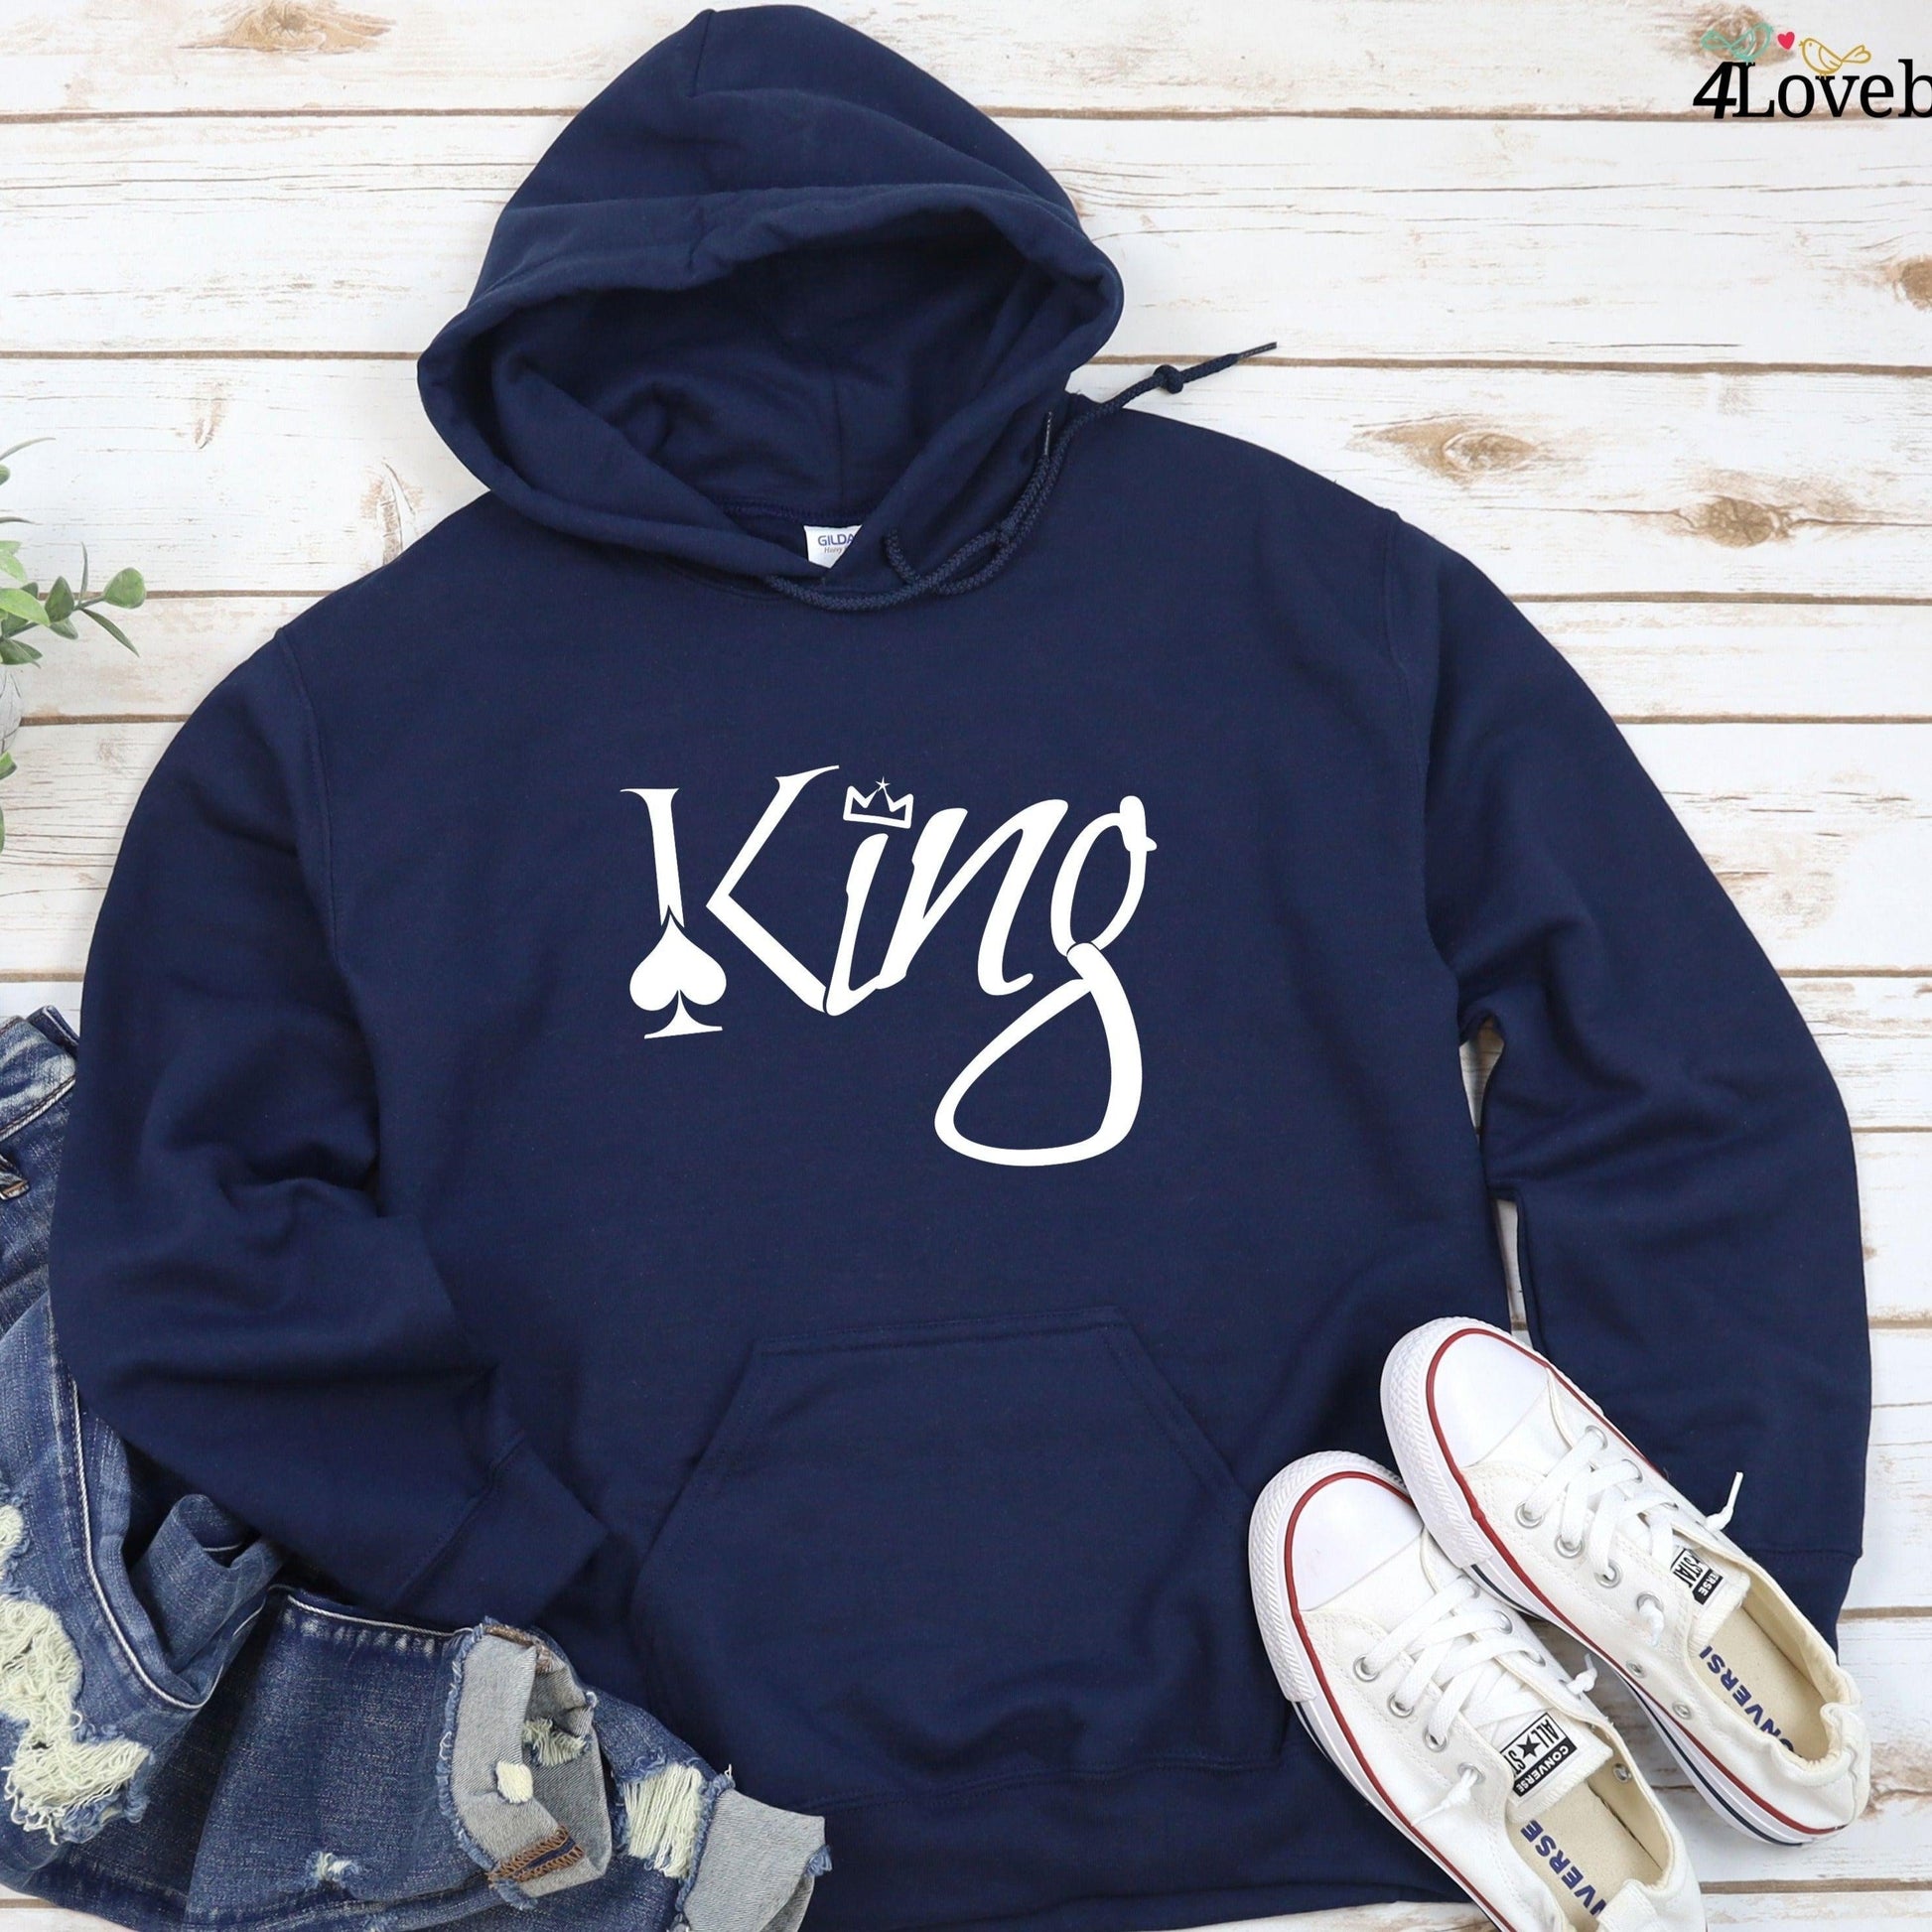 Couple Matching Set: King & Queen - Unique Relationships Gifts for Her & Him - 4Lovebirds